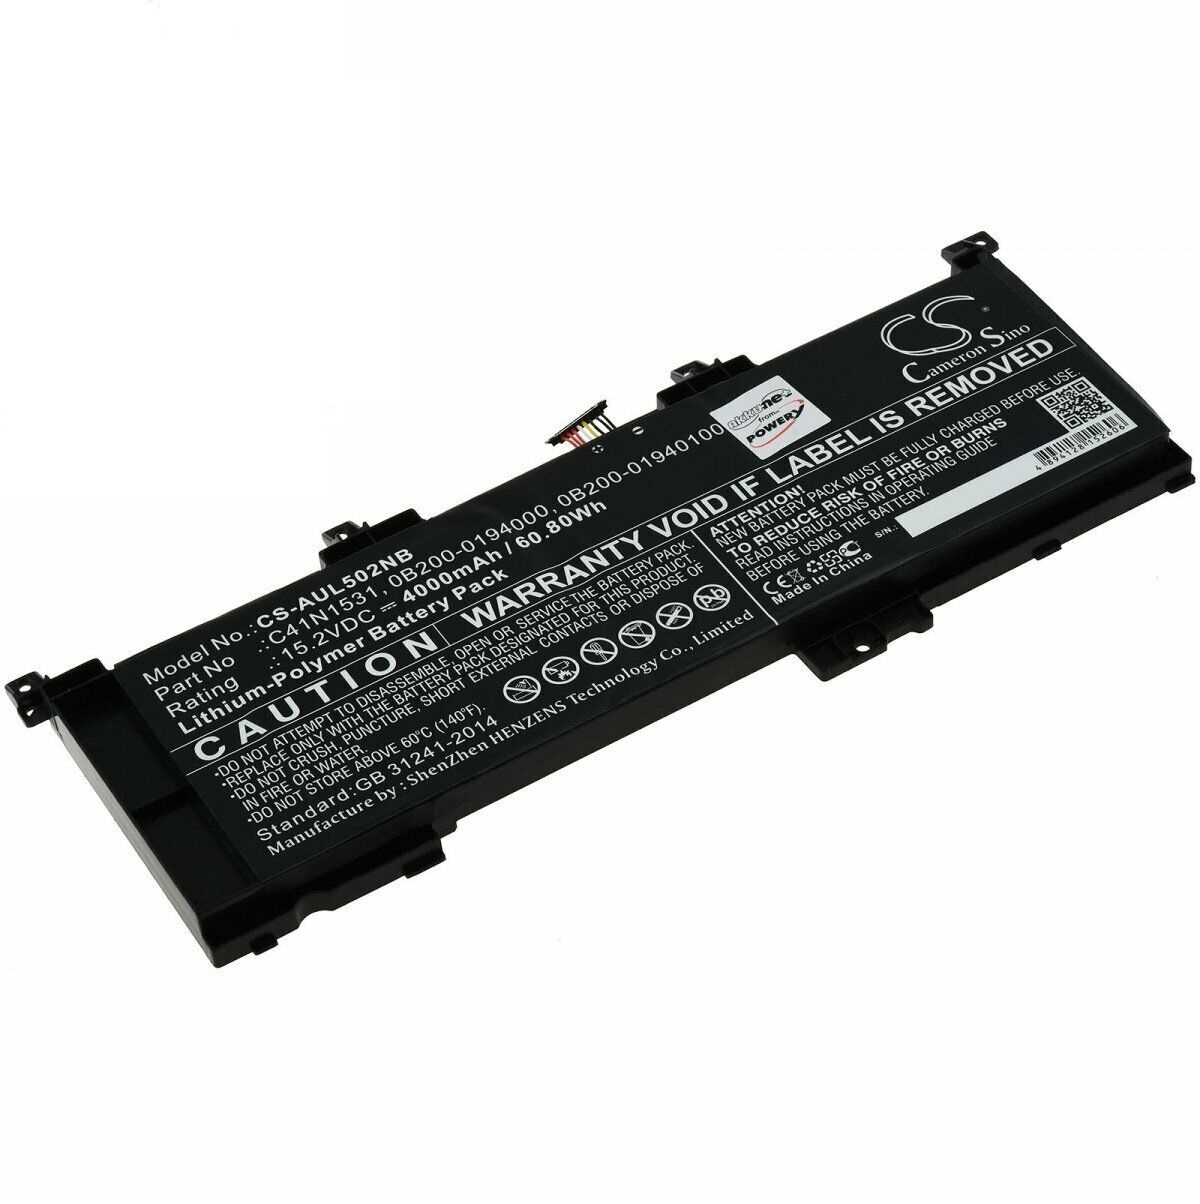 Accu voor C41N1531 0B200-01940100 Asus GL502VS-1A GL502VS-1E GL502VT-1B GL502VY GL502VY-1A (compatible)